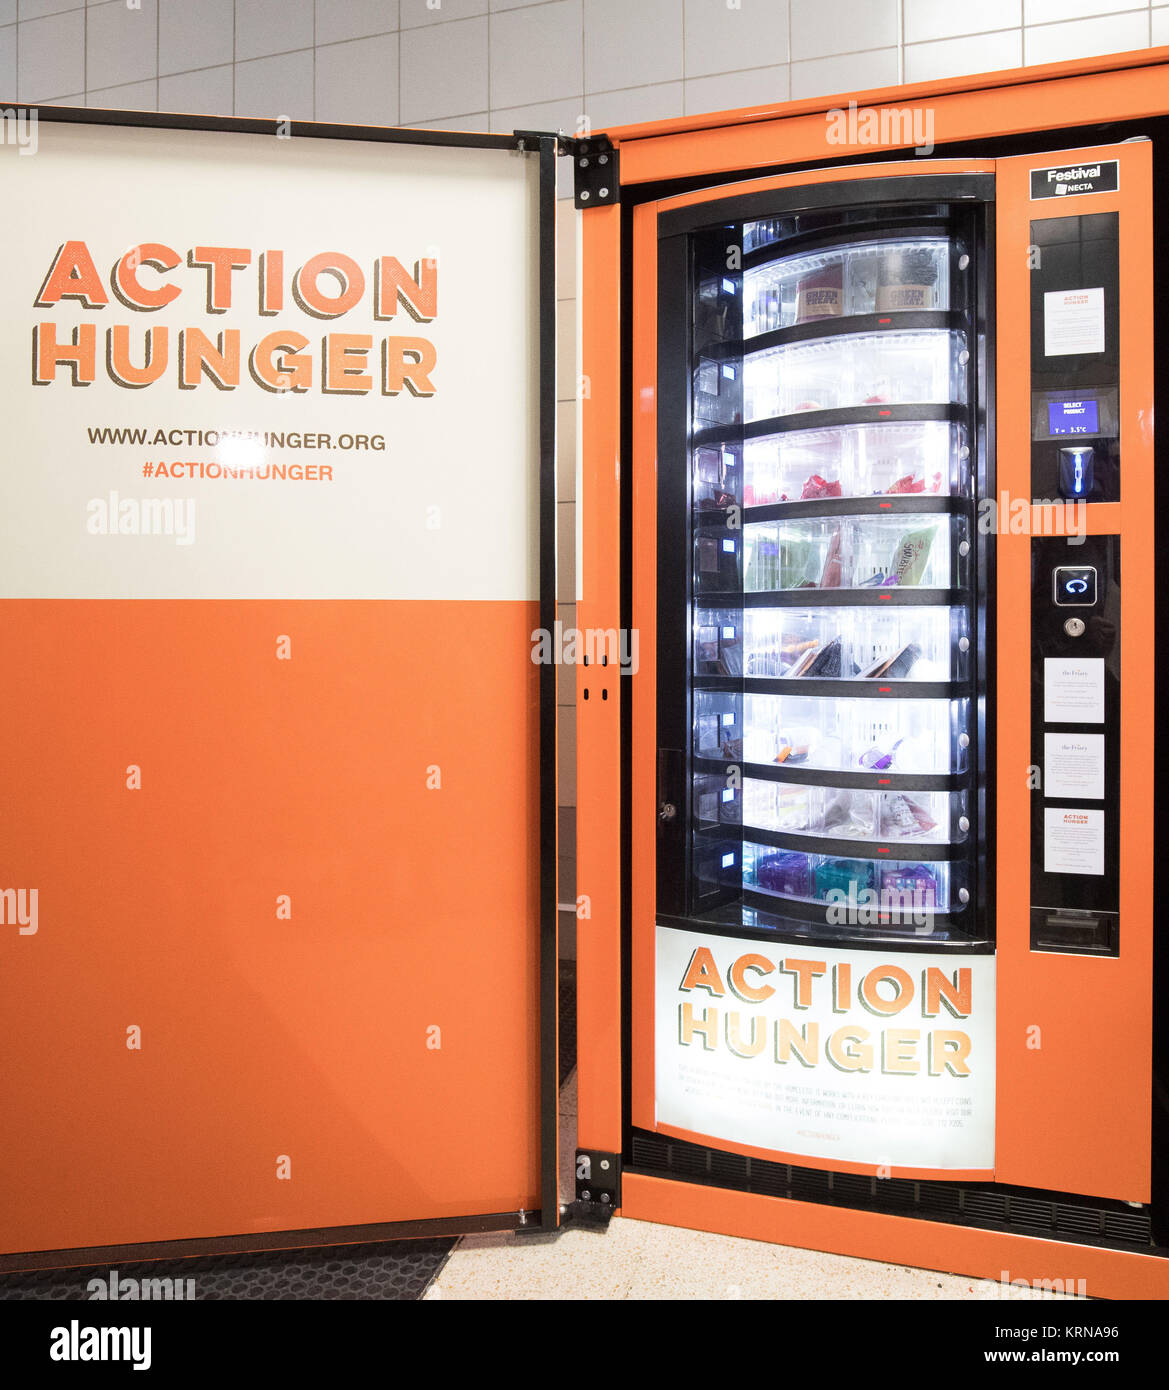 What Was Sold In The Very First Food Vending Machine?